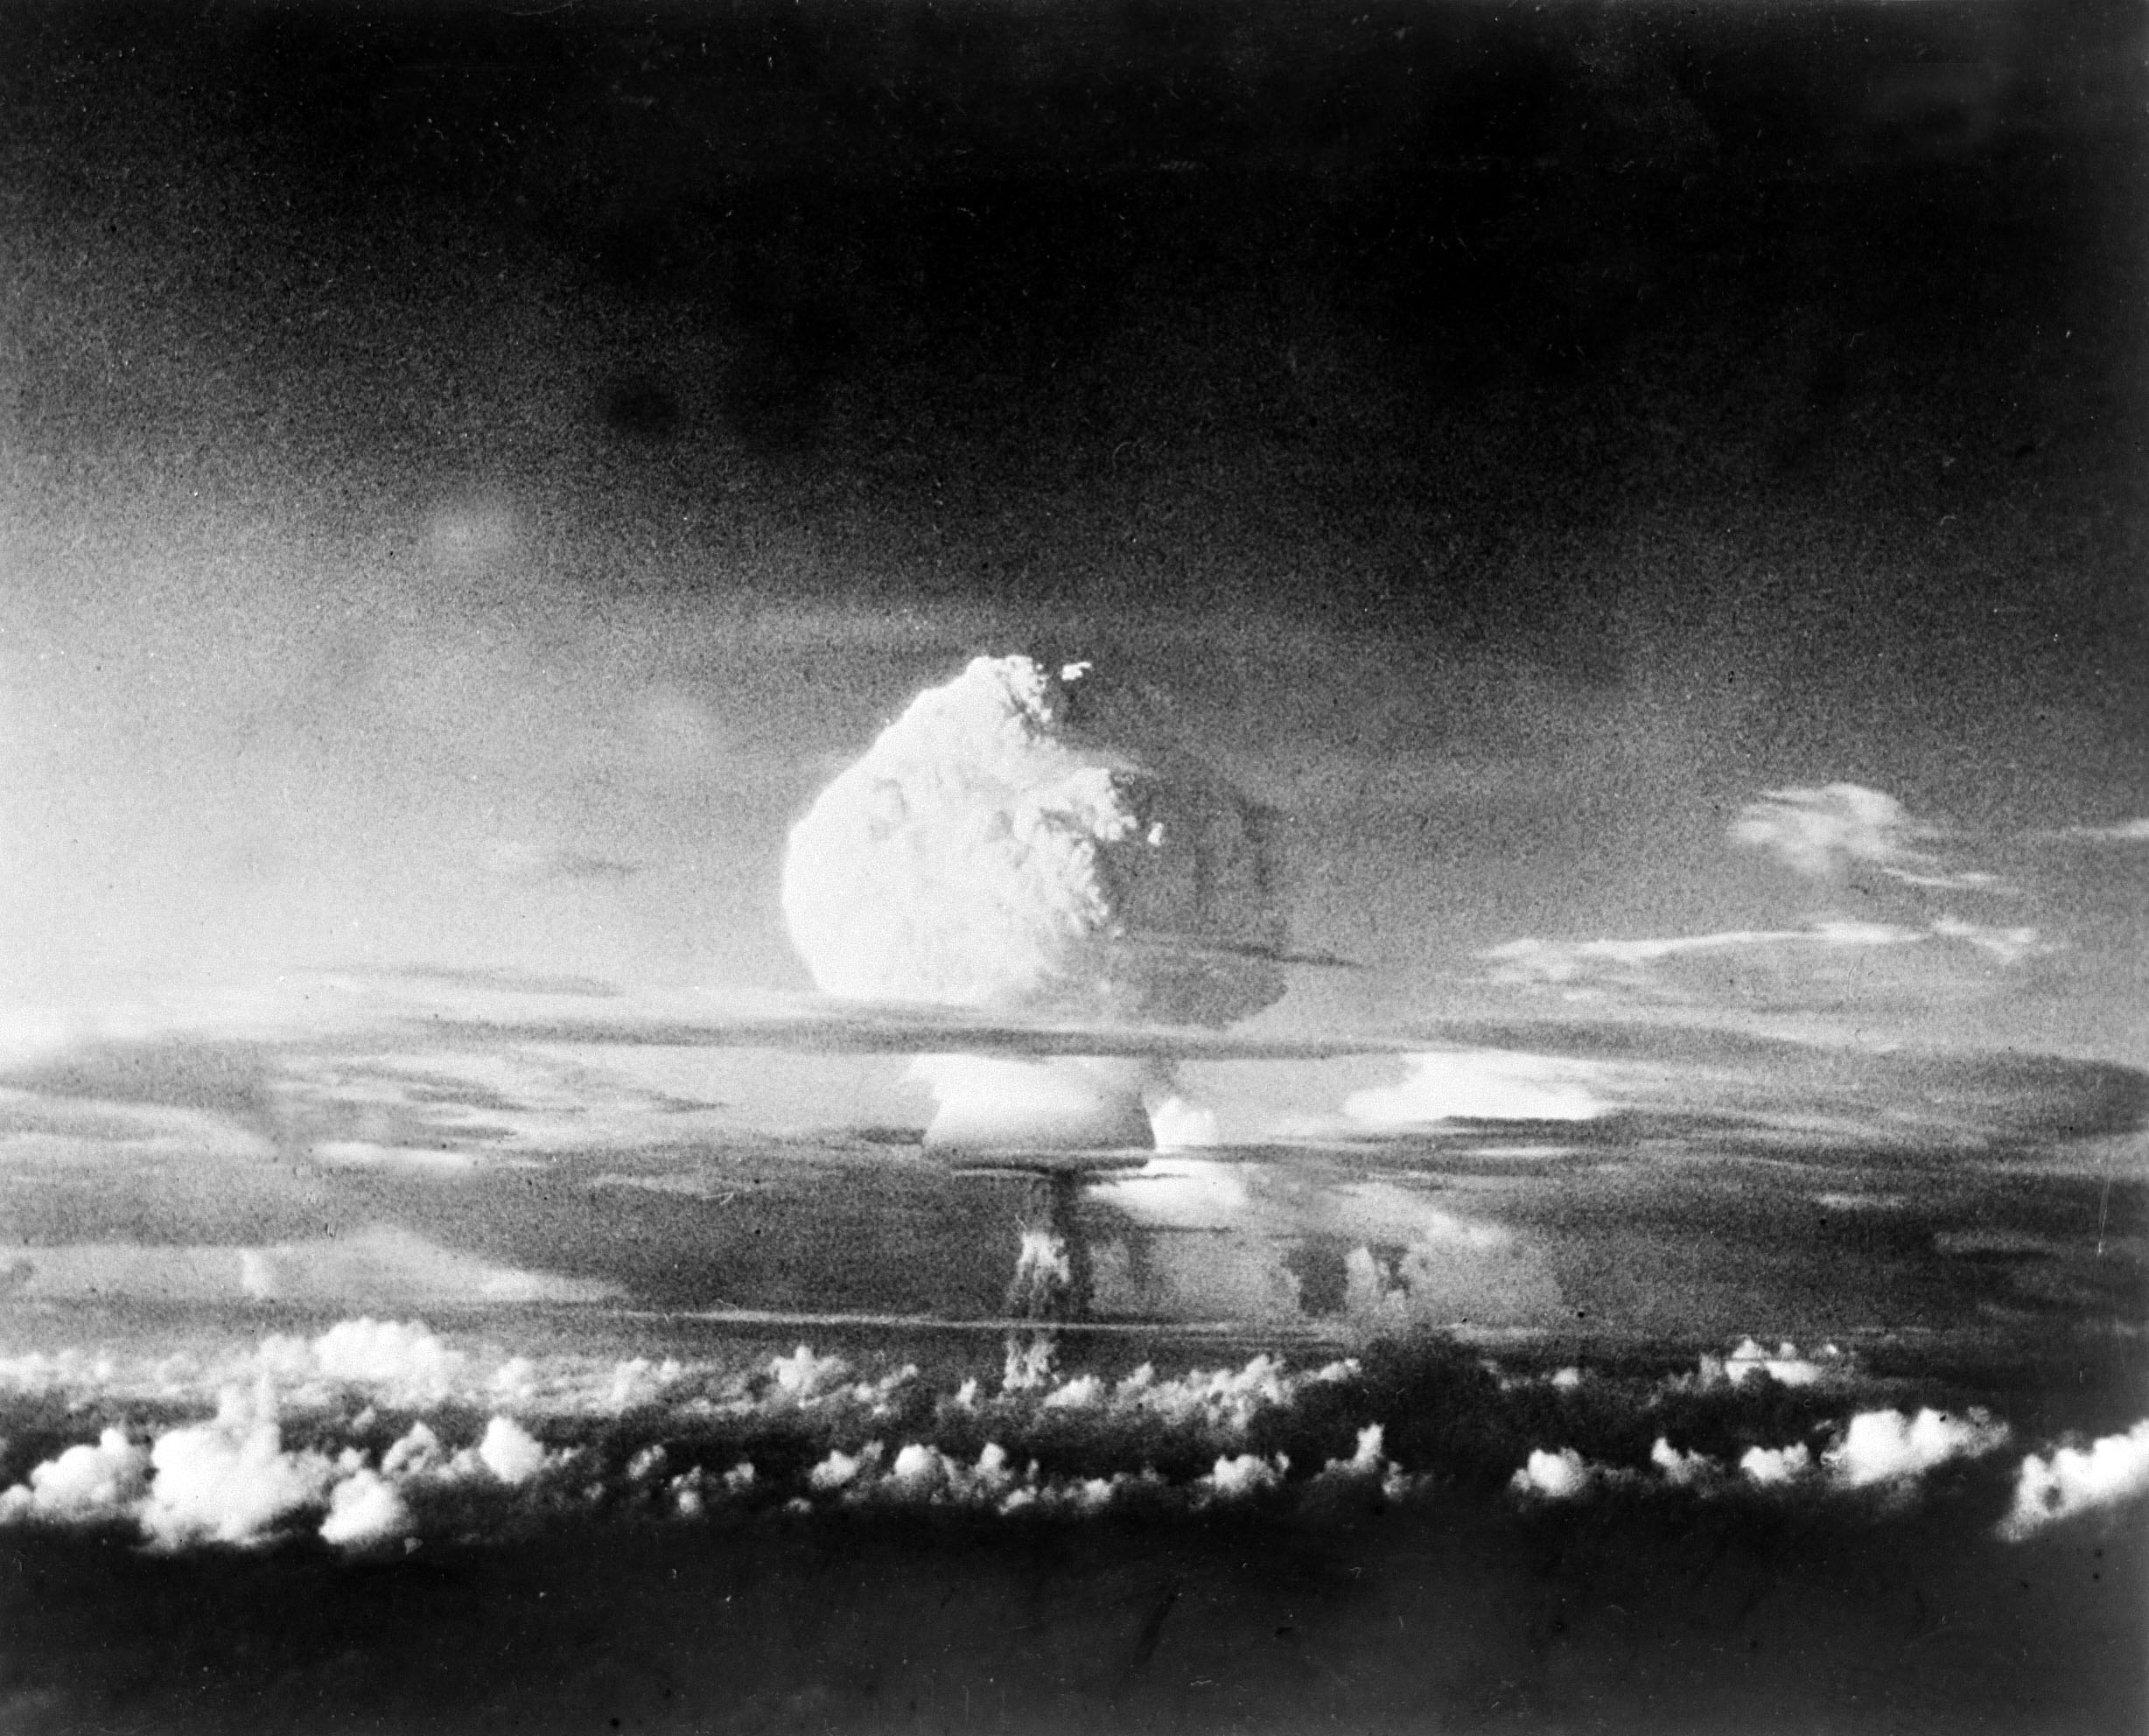 The Hydrogen Bomb, pic: 1952, A picture of the thermo-nuclear device tested by the U,S, at the Elugelab test island in the Marshall Islands , The picture is taken from 50 miles distant and at